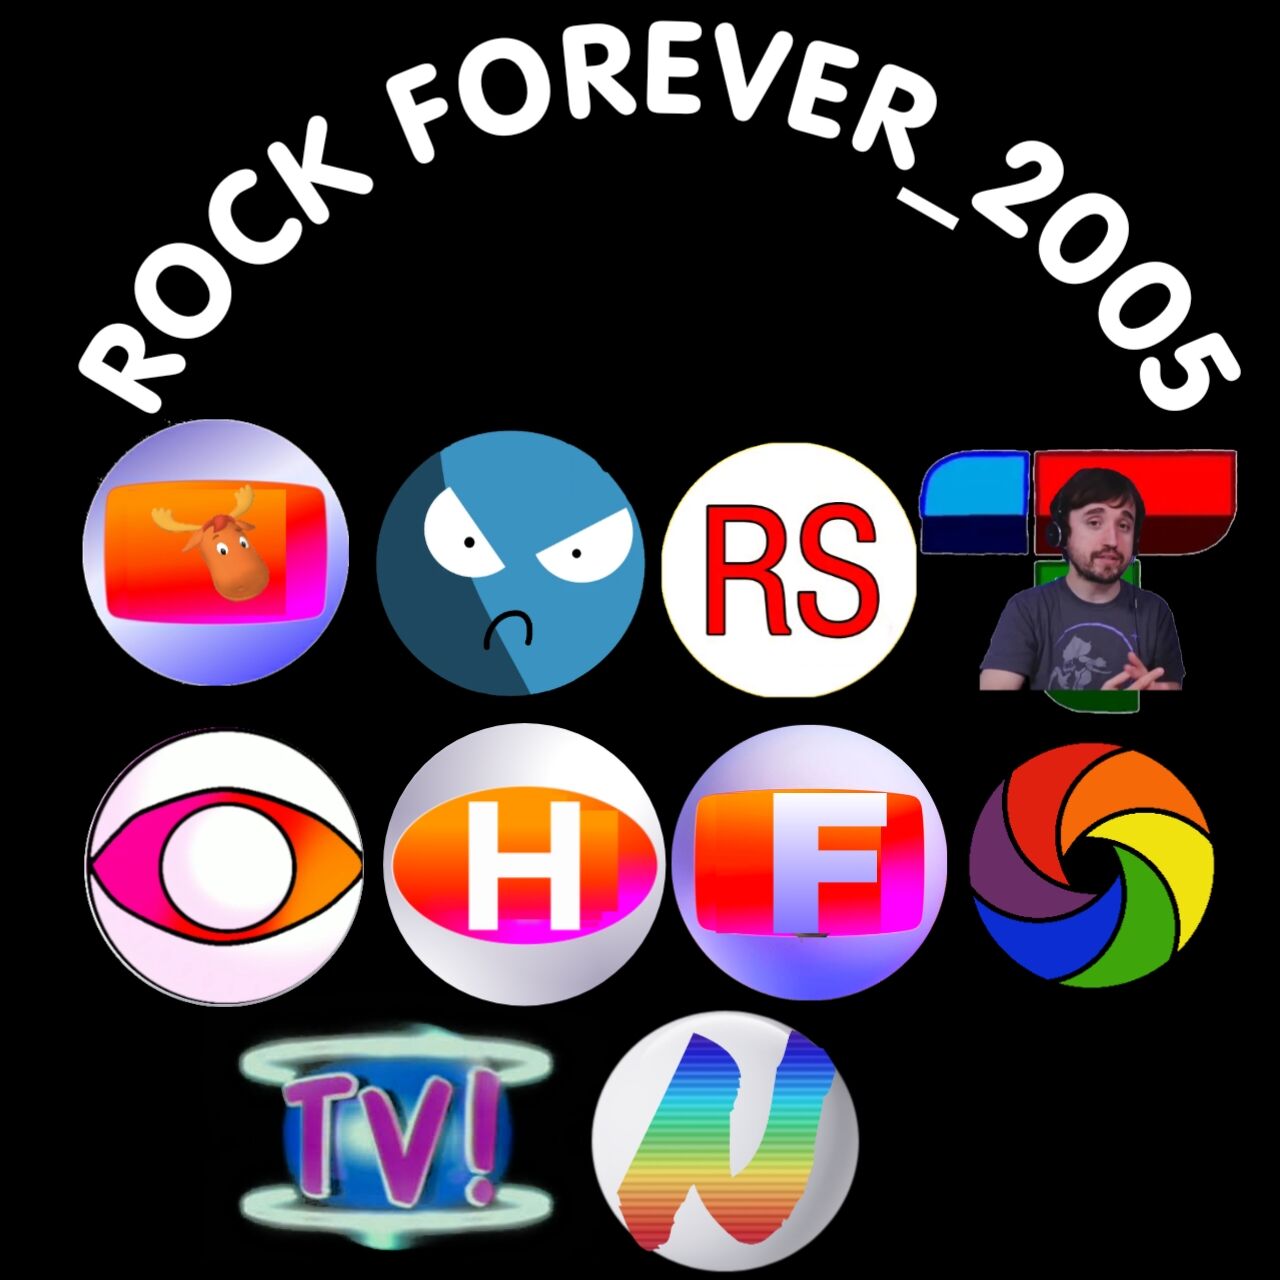 https://static.wikia.nocookie.net/bravopedia/images/a/aa/Rock_Forever_2005.jpg/revision/latest/scale-to-width-down/1280?cb=20230606114902